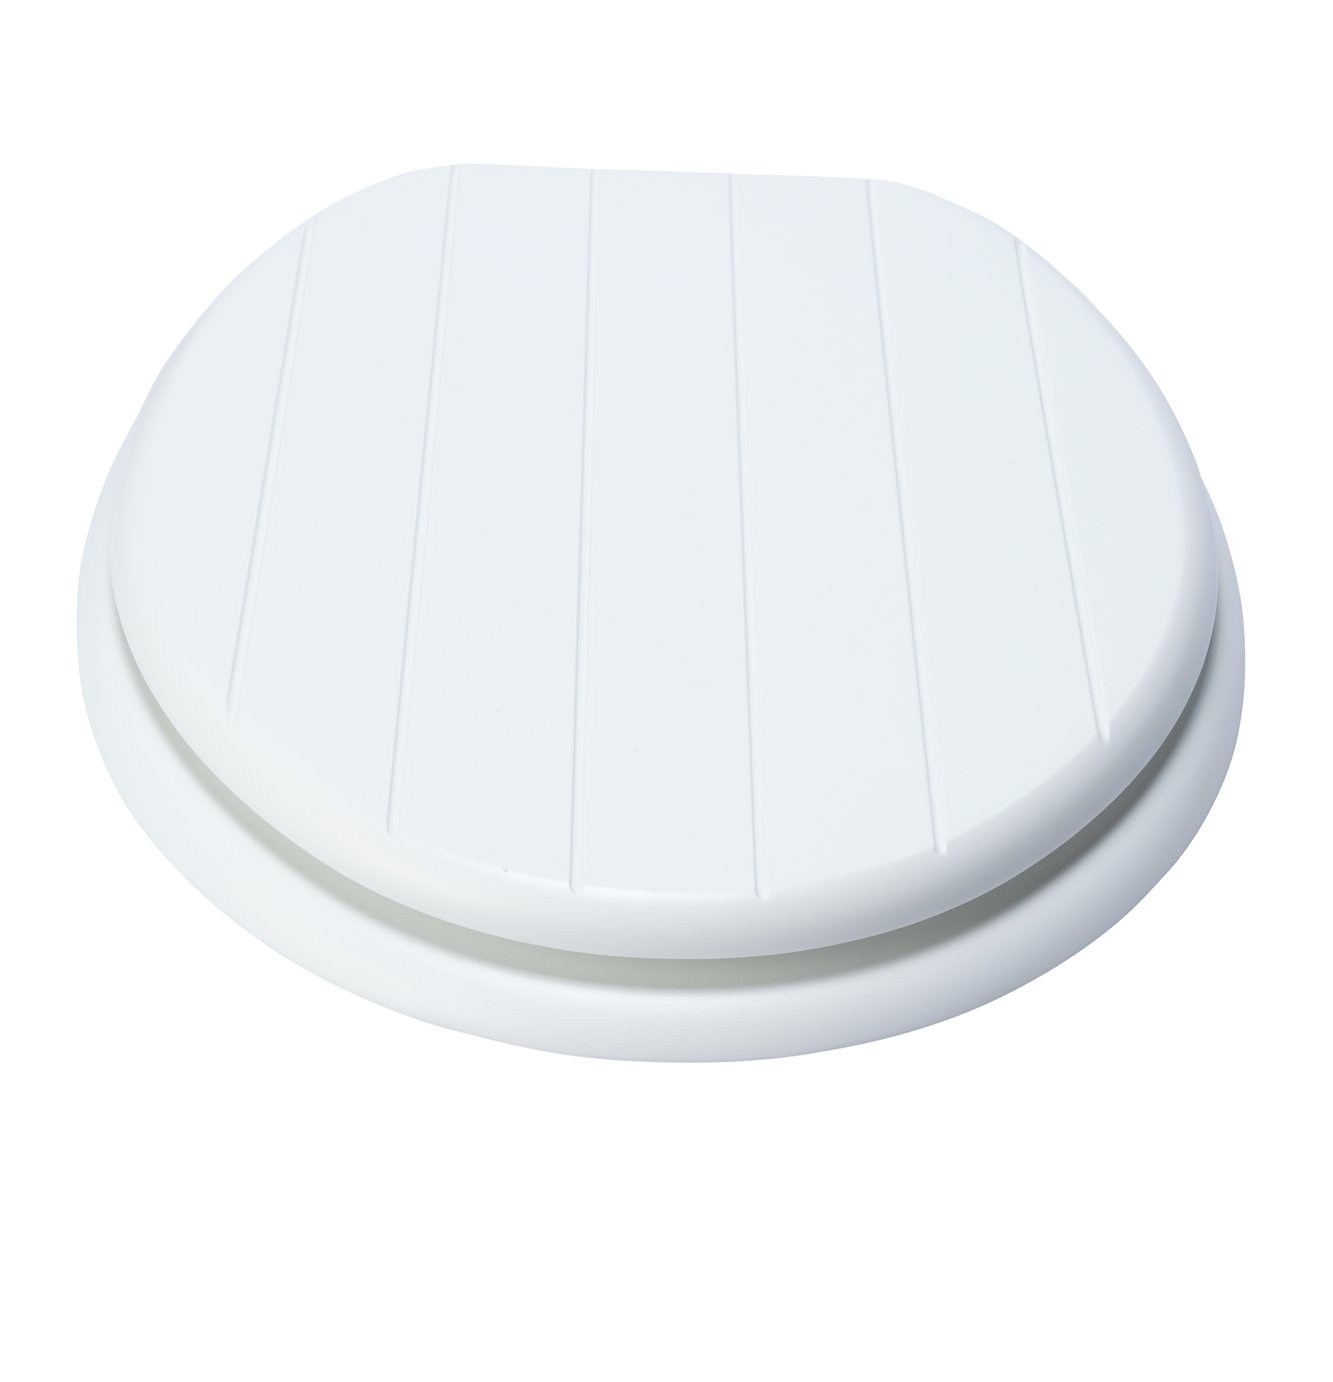 Argos Home Tongue and Groove Style Toilet Seat - White